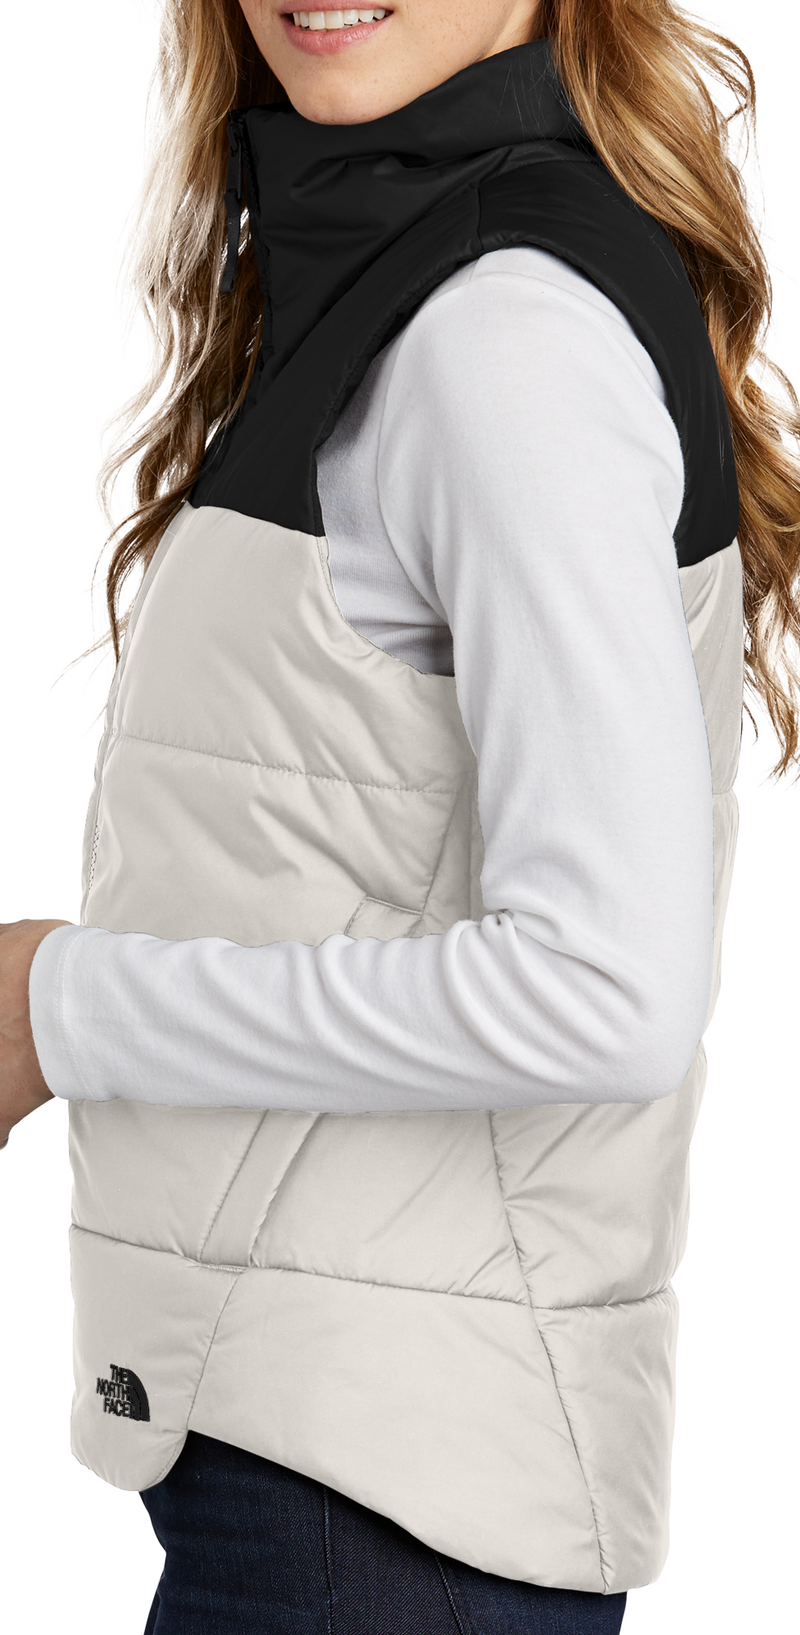 The North Face Ladies Everyday Insulated Jacket, Product